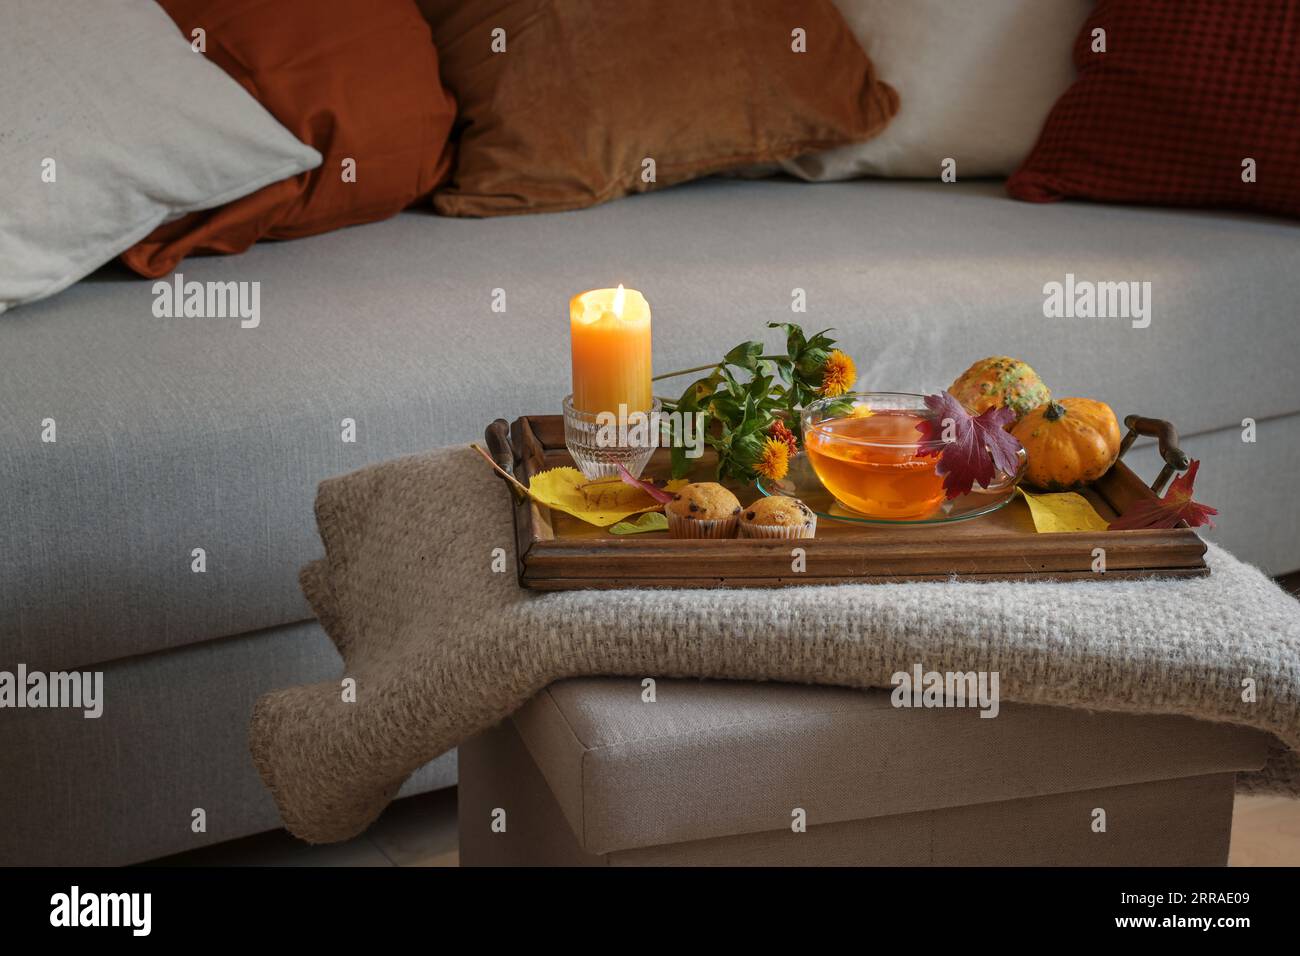 Cup of hot tea served on a wooden tray with candle, flowers, pumpkins and biscuits on a woolen blanket at the couch, cozy autumn at home, copy space, Stock Photo